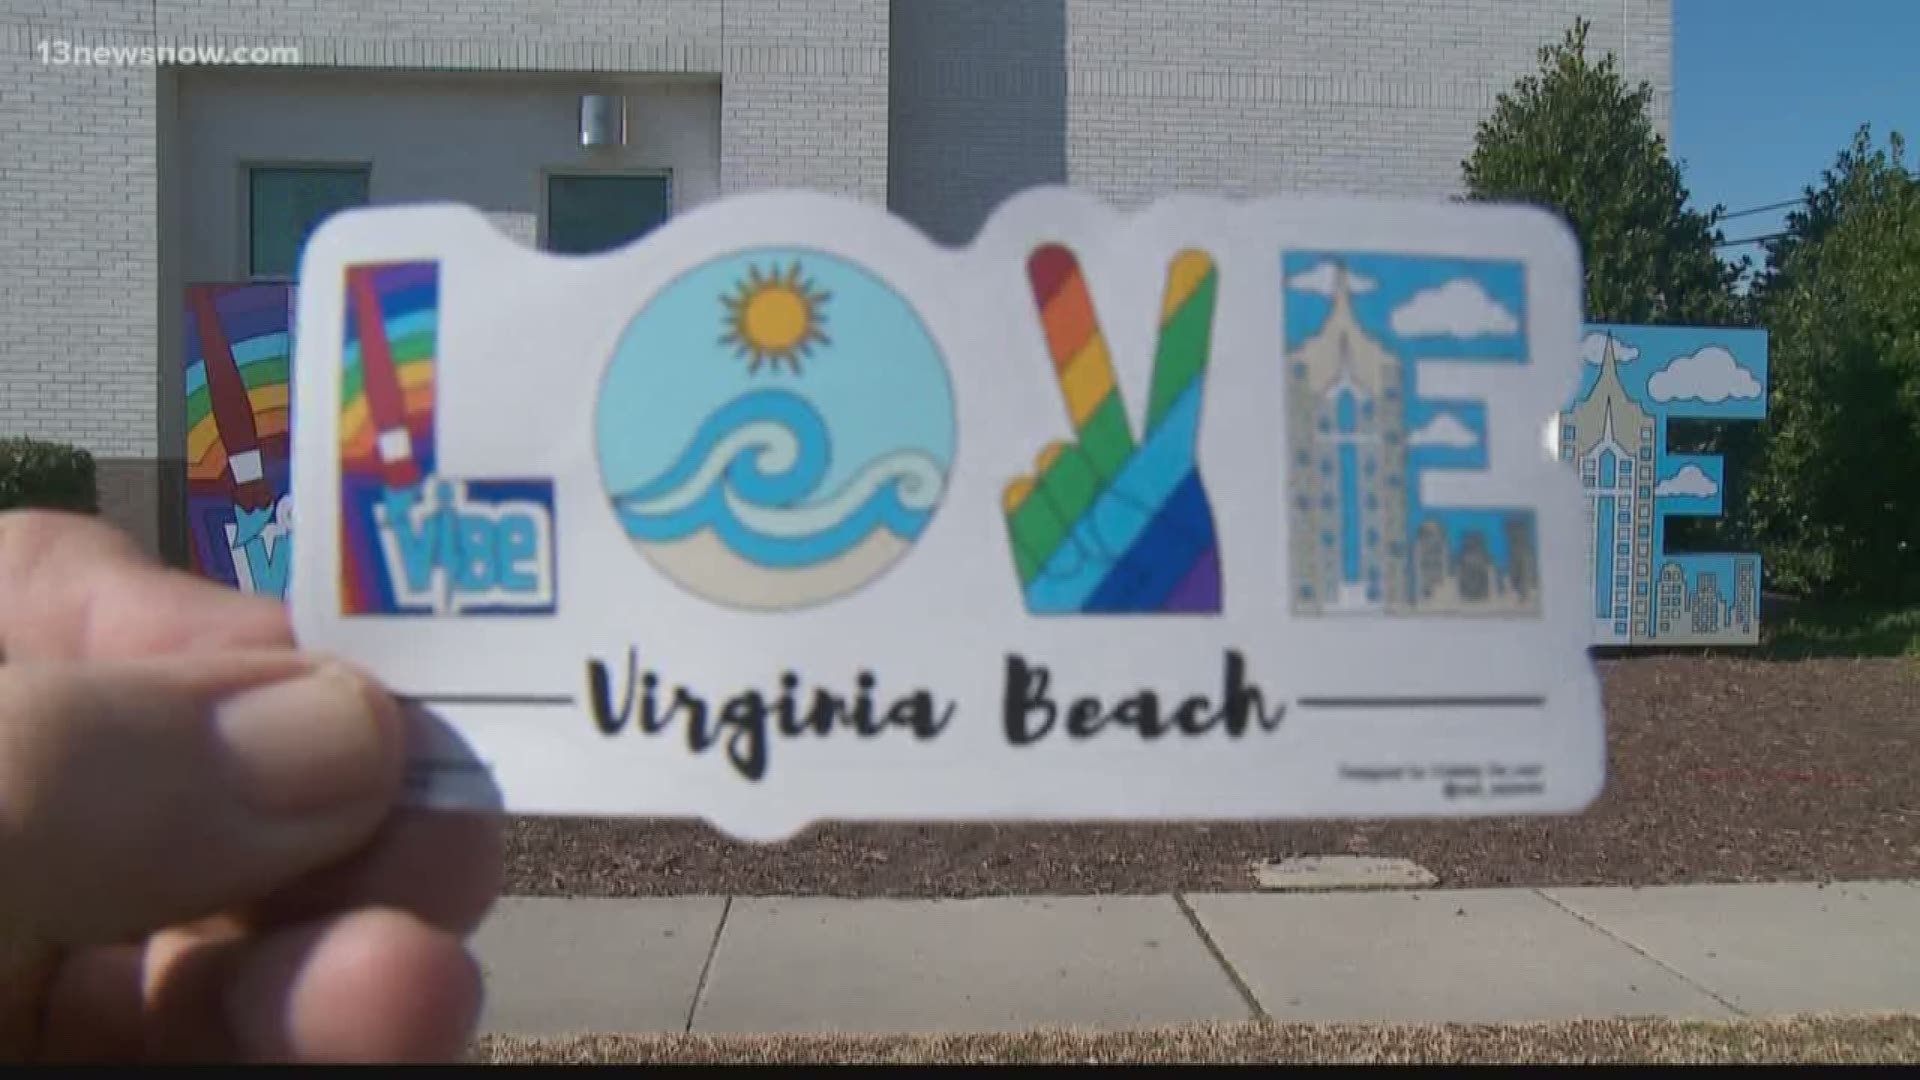 Virginia Beach is isharing the love with a social media campaign asking people to take to social media to share what they love about the city.